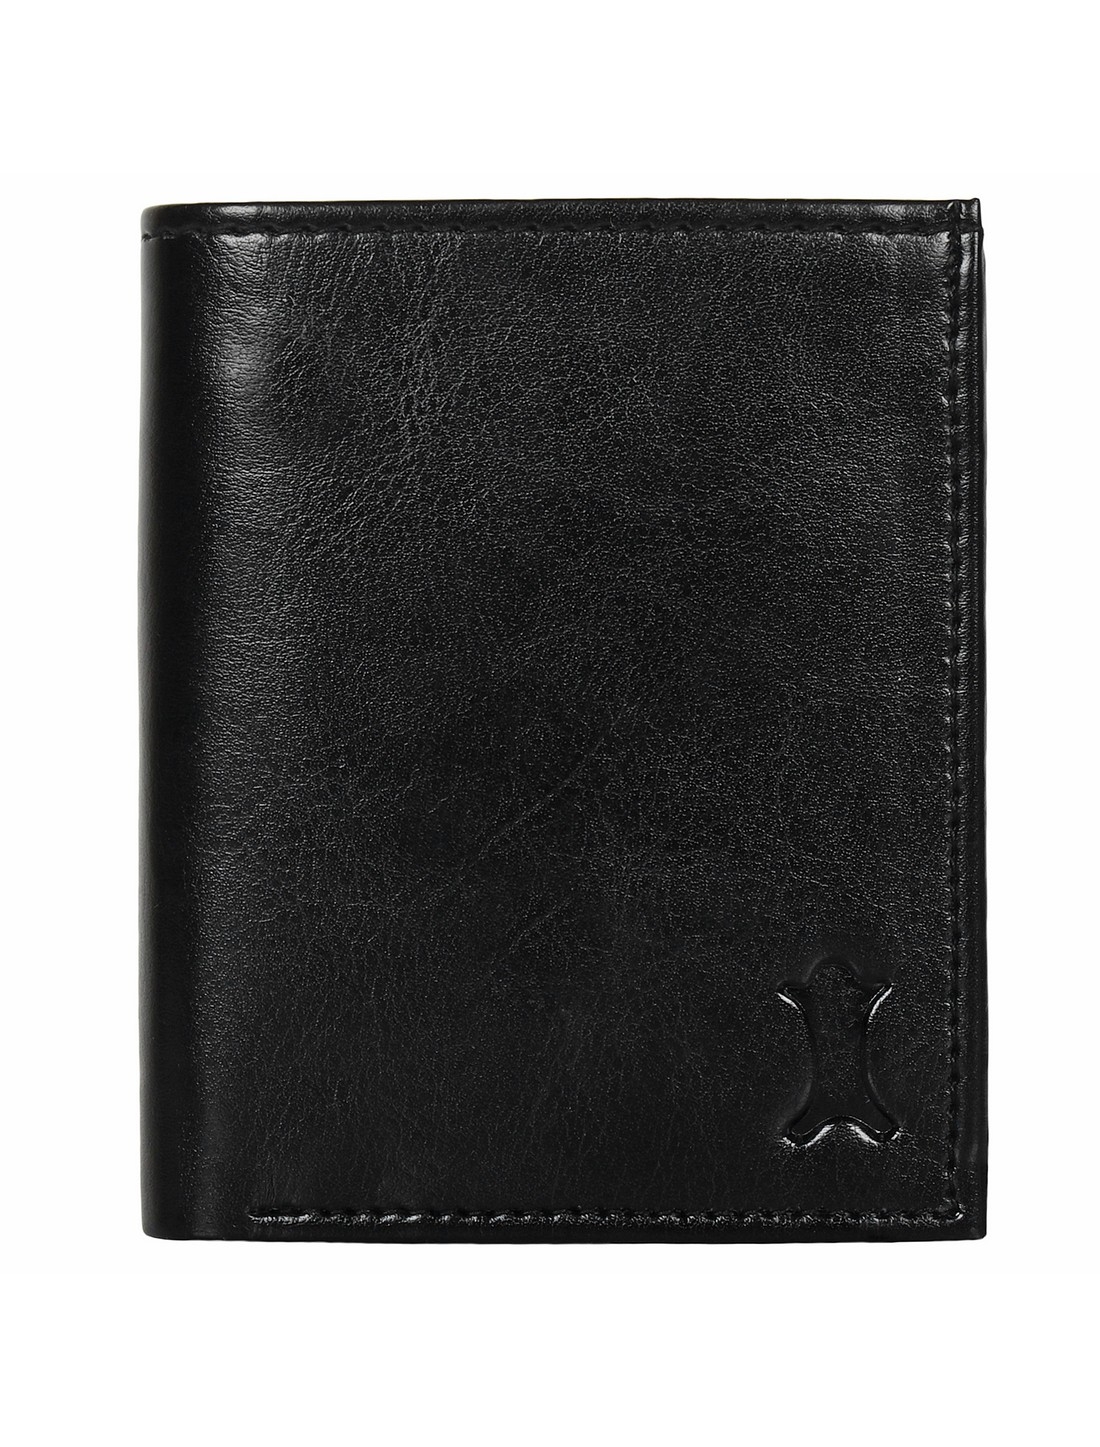 CREATURE | CREATURE Bi-Fold Black Pu-Leather Wallet with Multiple Card Slots for Men